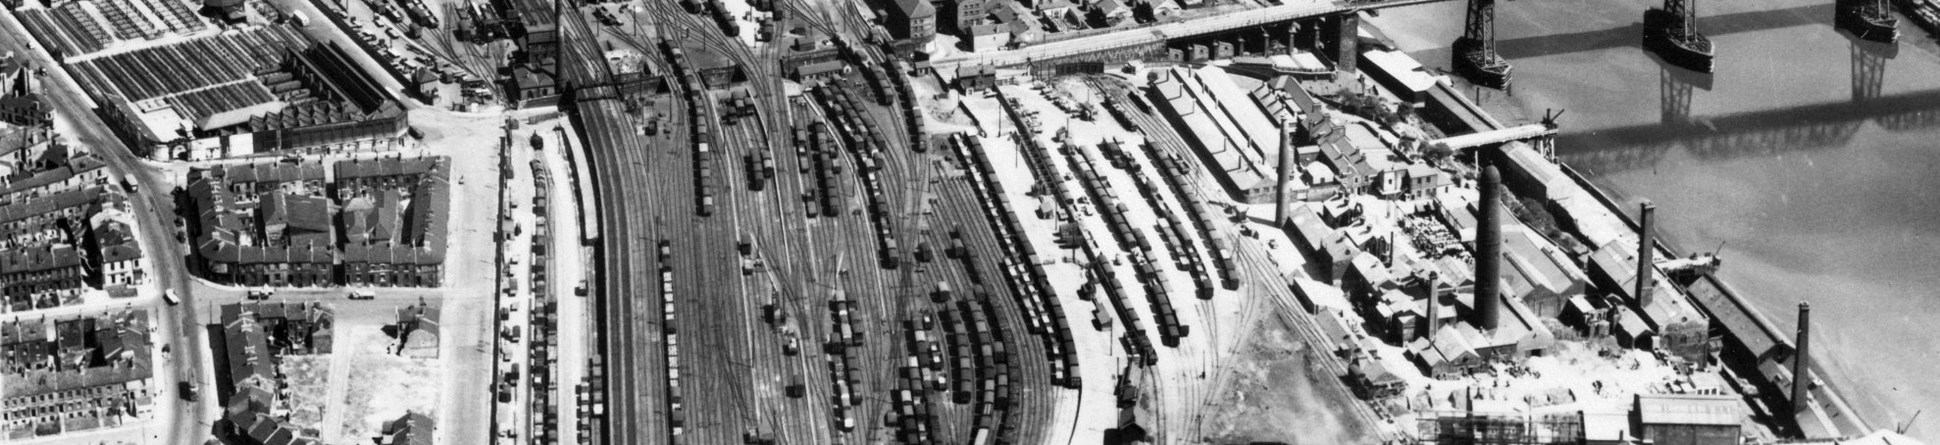 Large goods depot at Newcastle from the air looking east